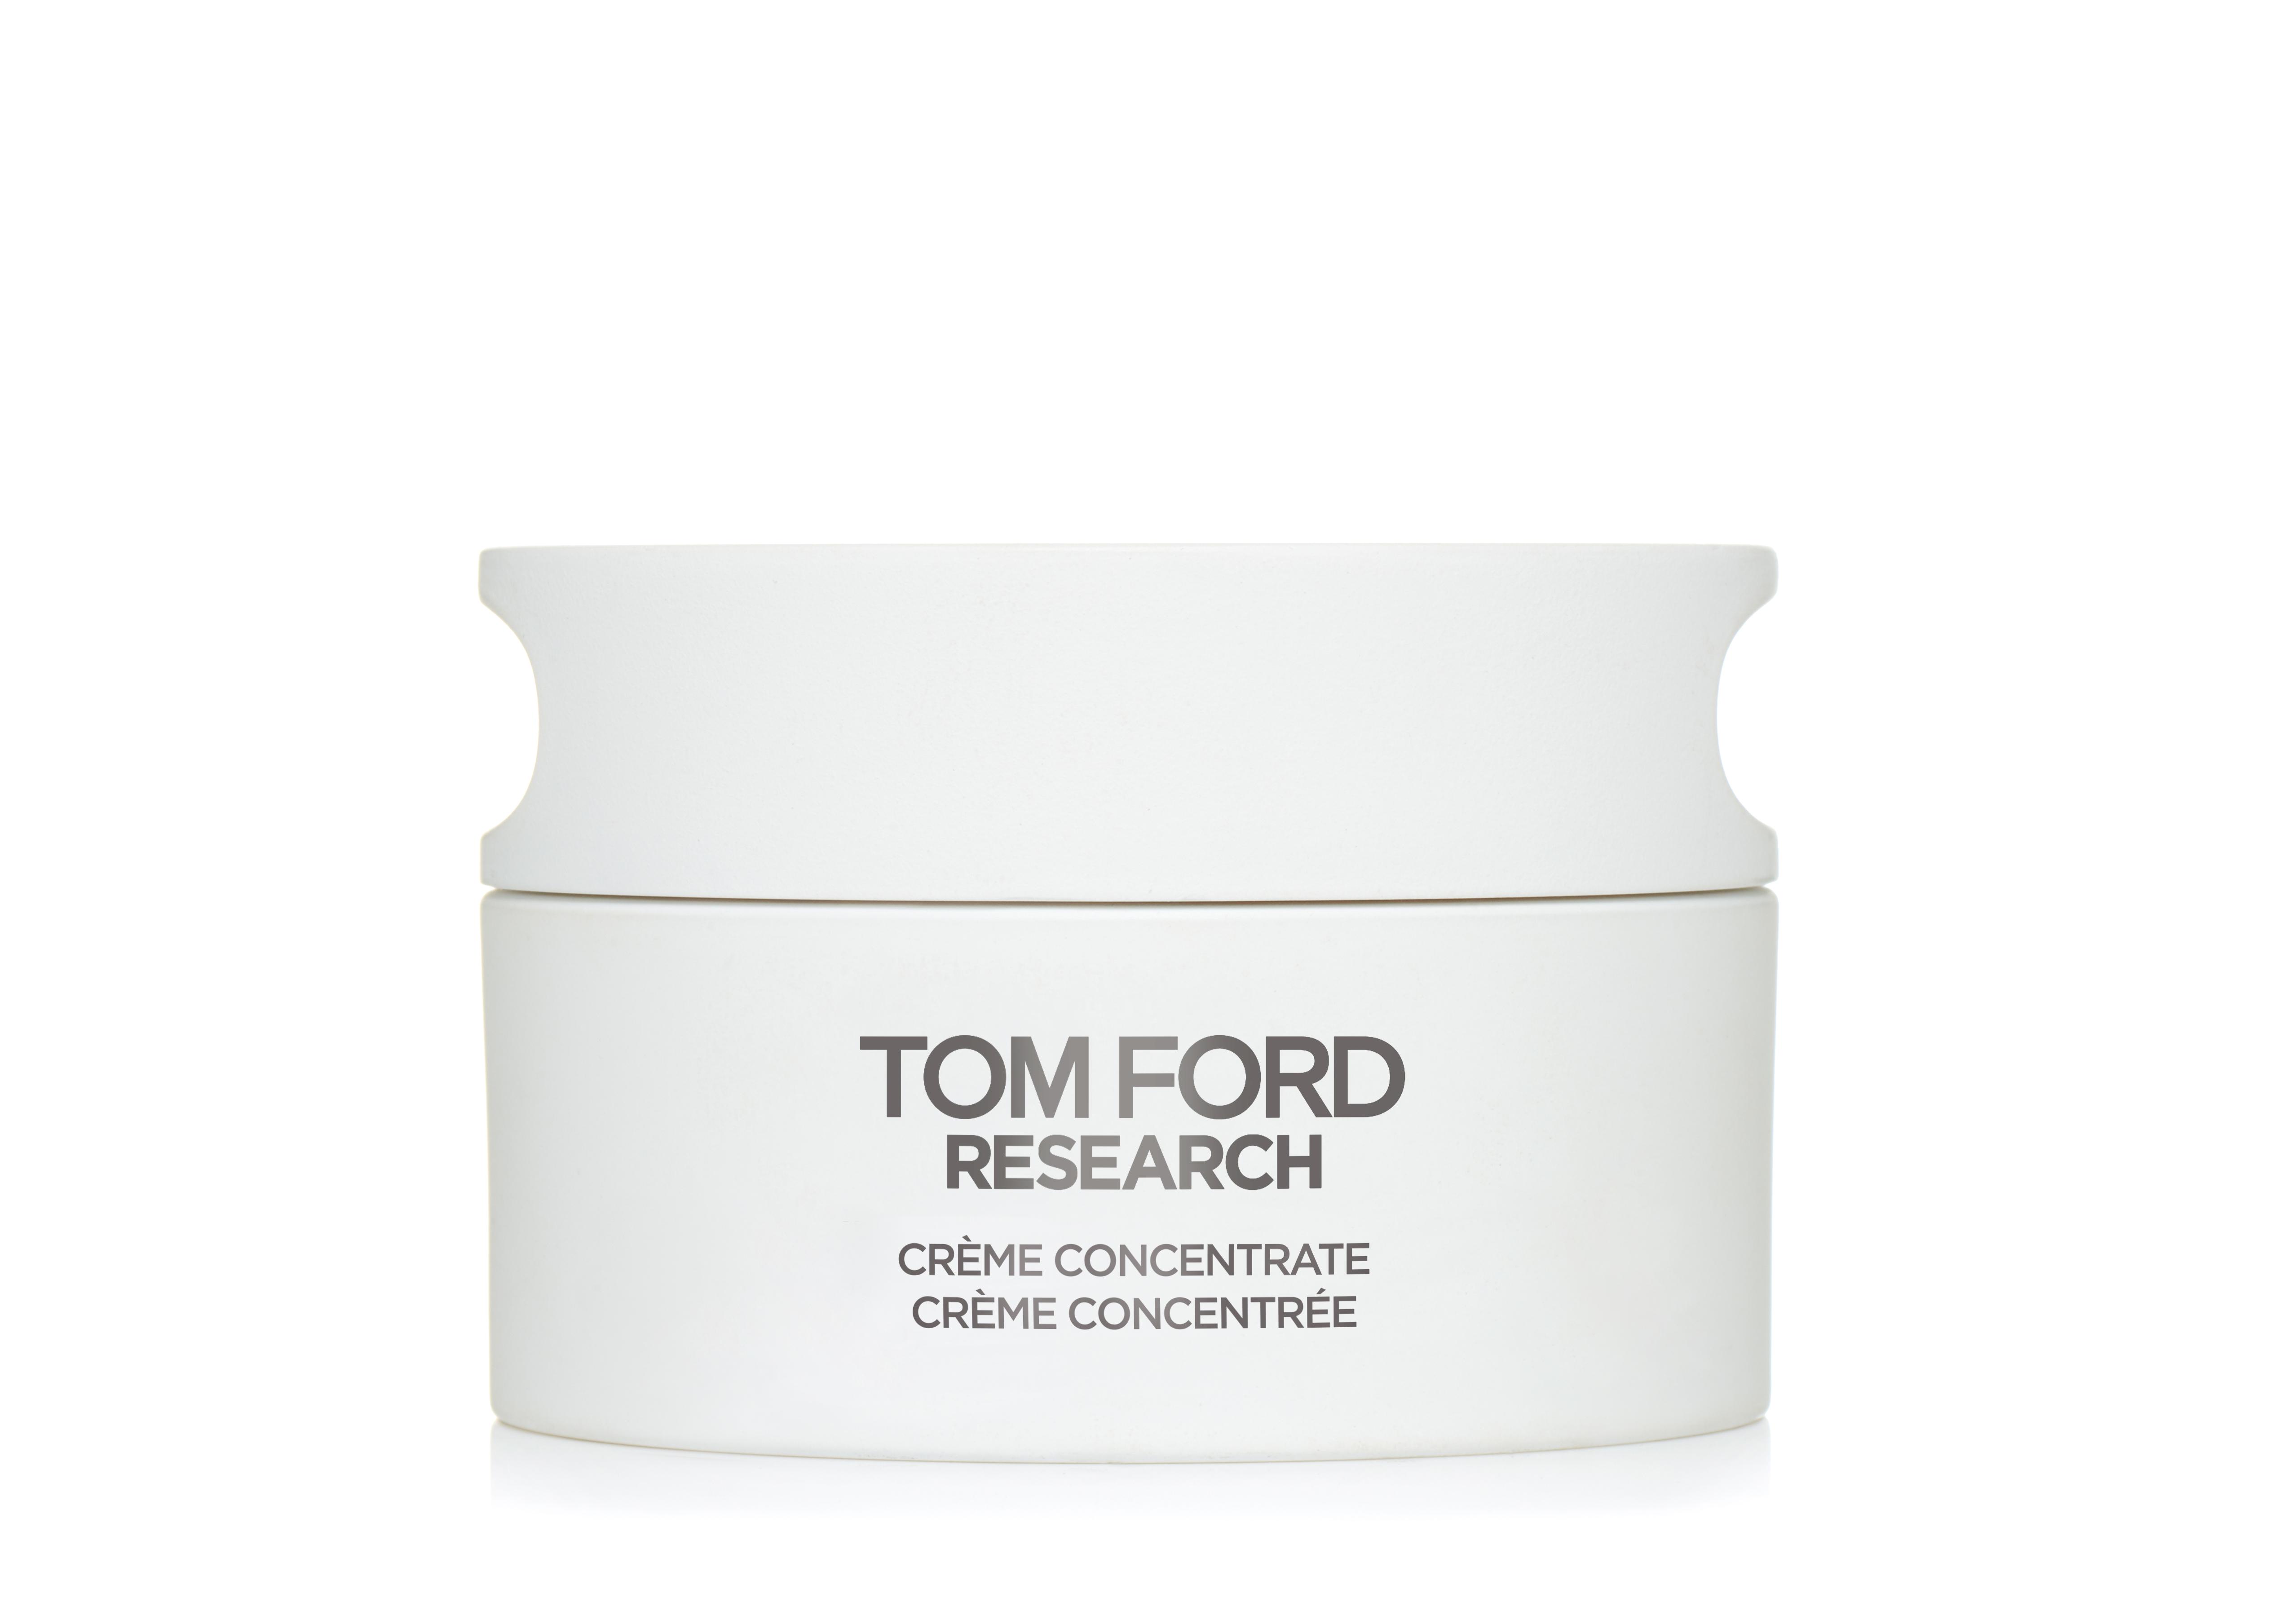 Ford TOM CREME CONCENTRATE | TomFord.com